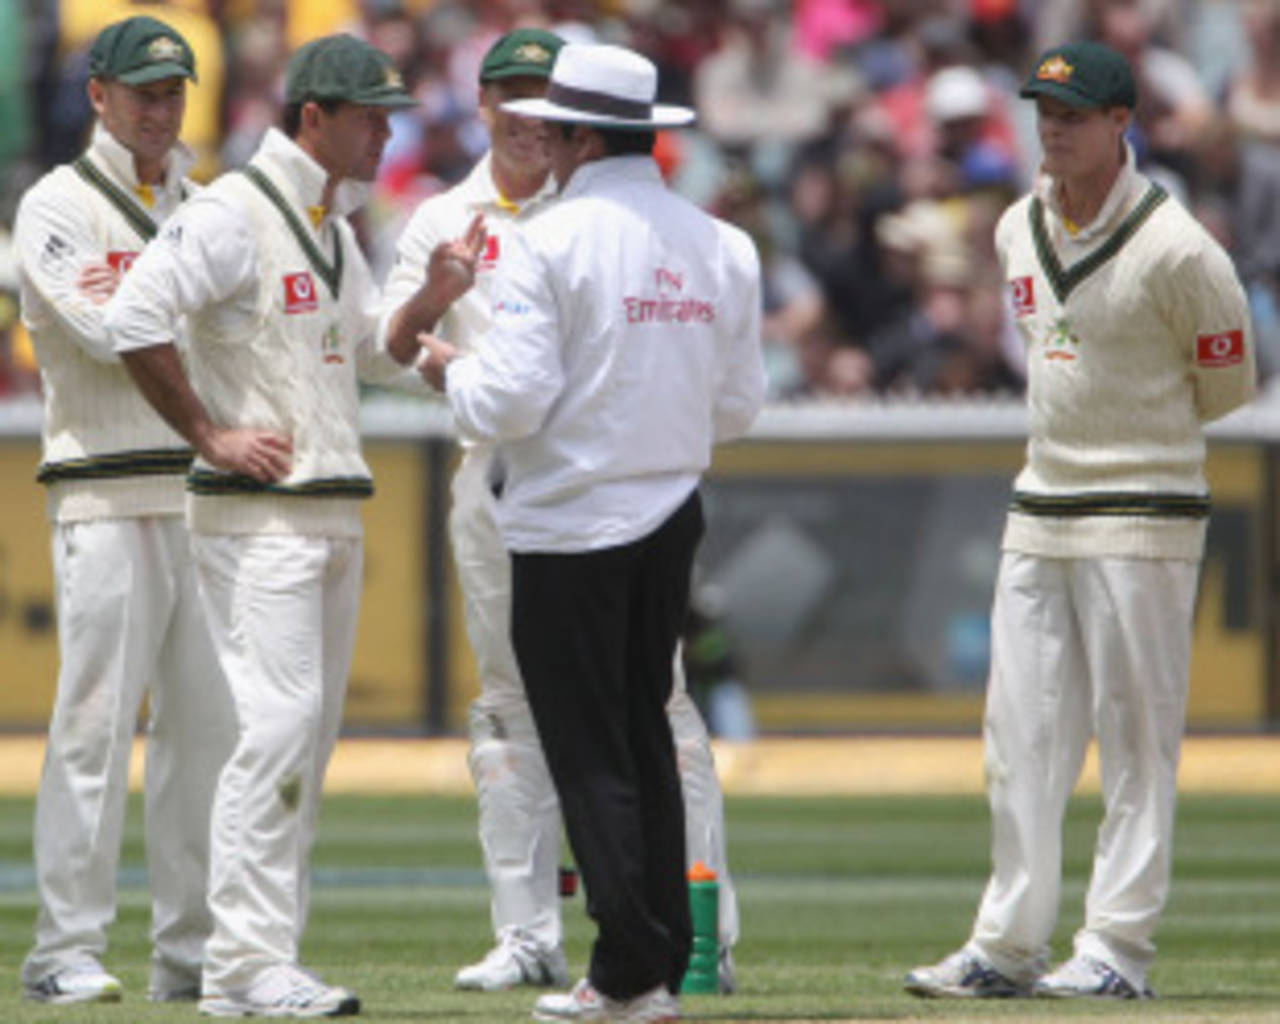 Ricky Ponting was involved in an ugly incident where he argued with the umpires after an unsuccessful review, Australia v England, 4th Test, Melbourne, 2nd day, December 26, 2010 